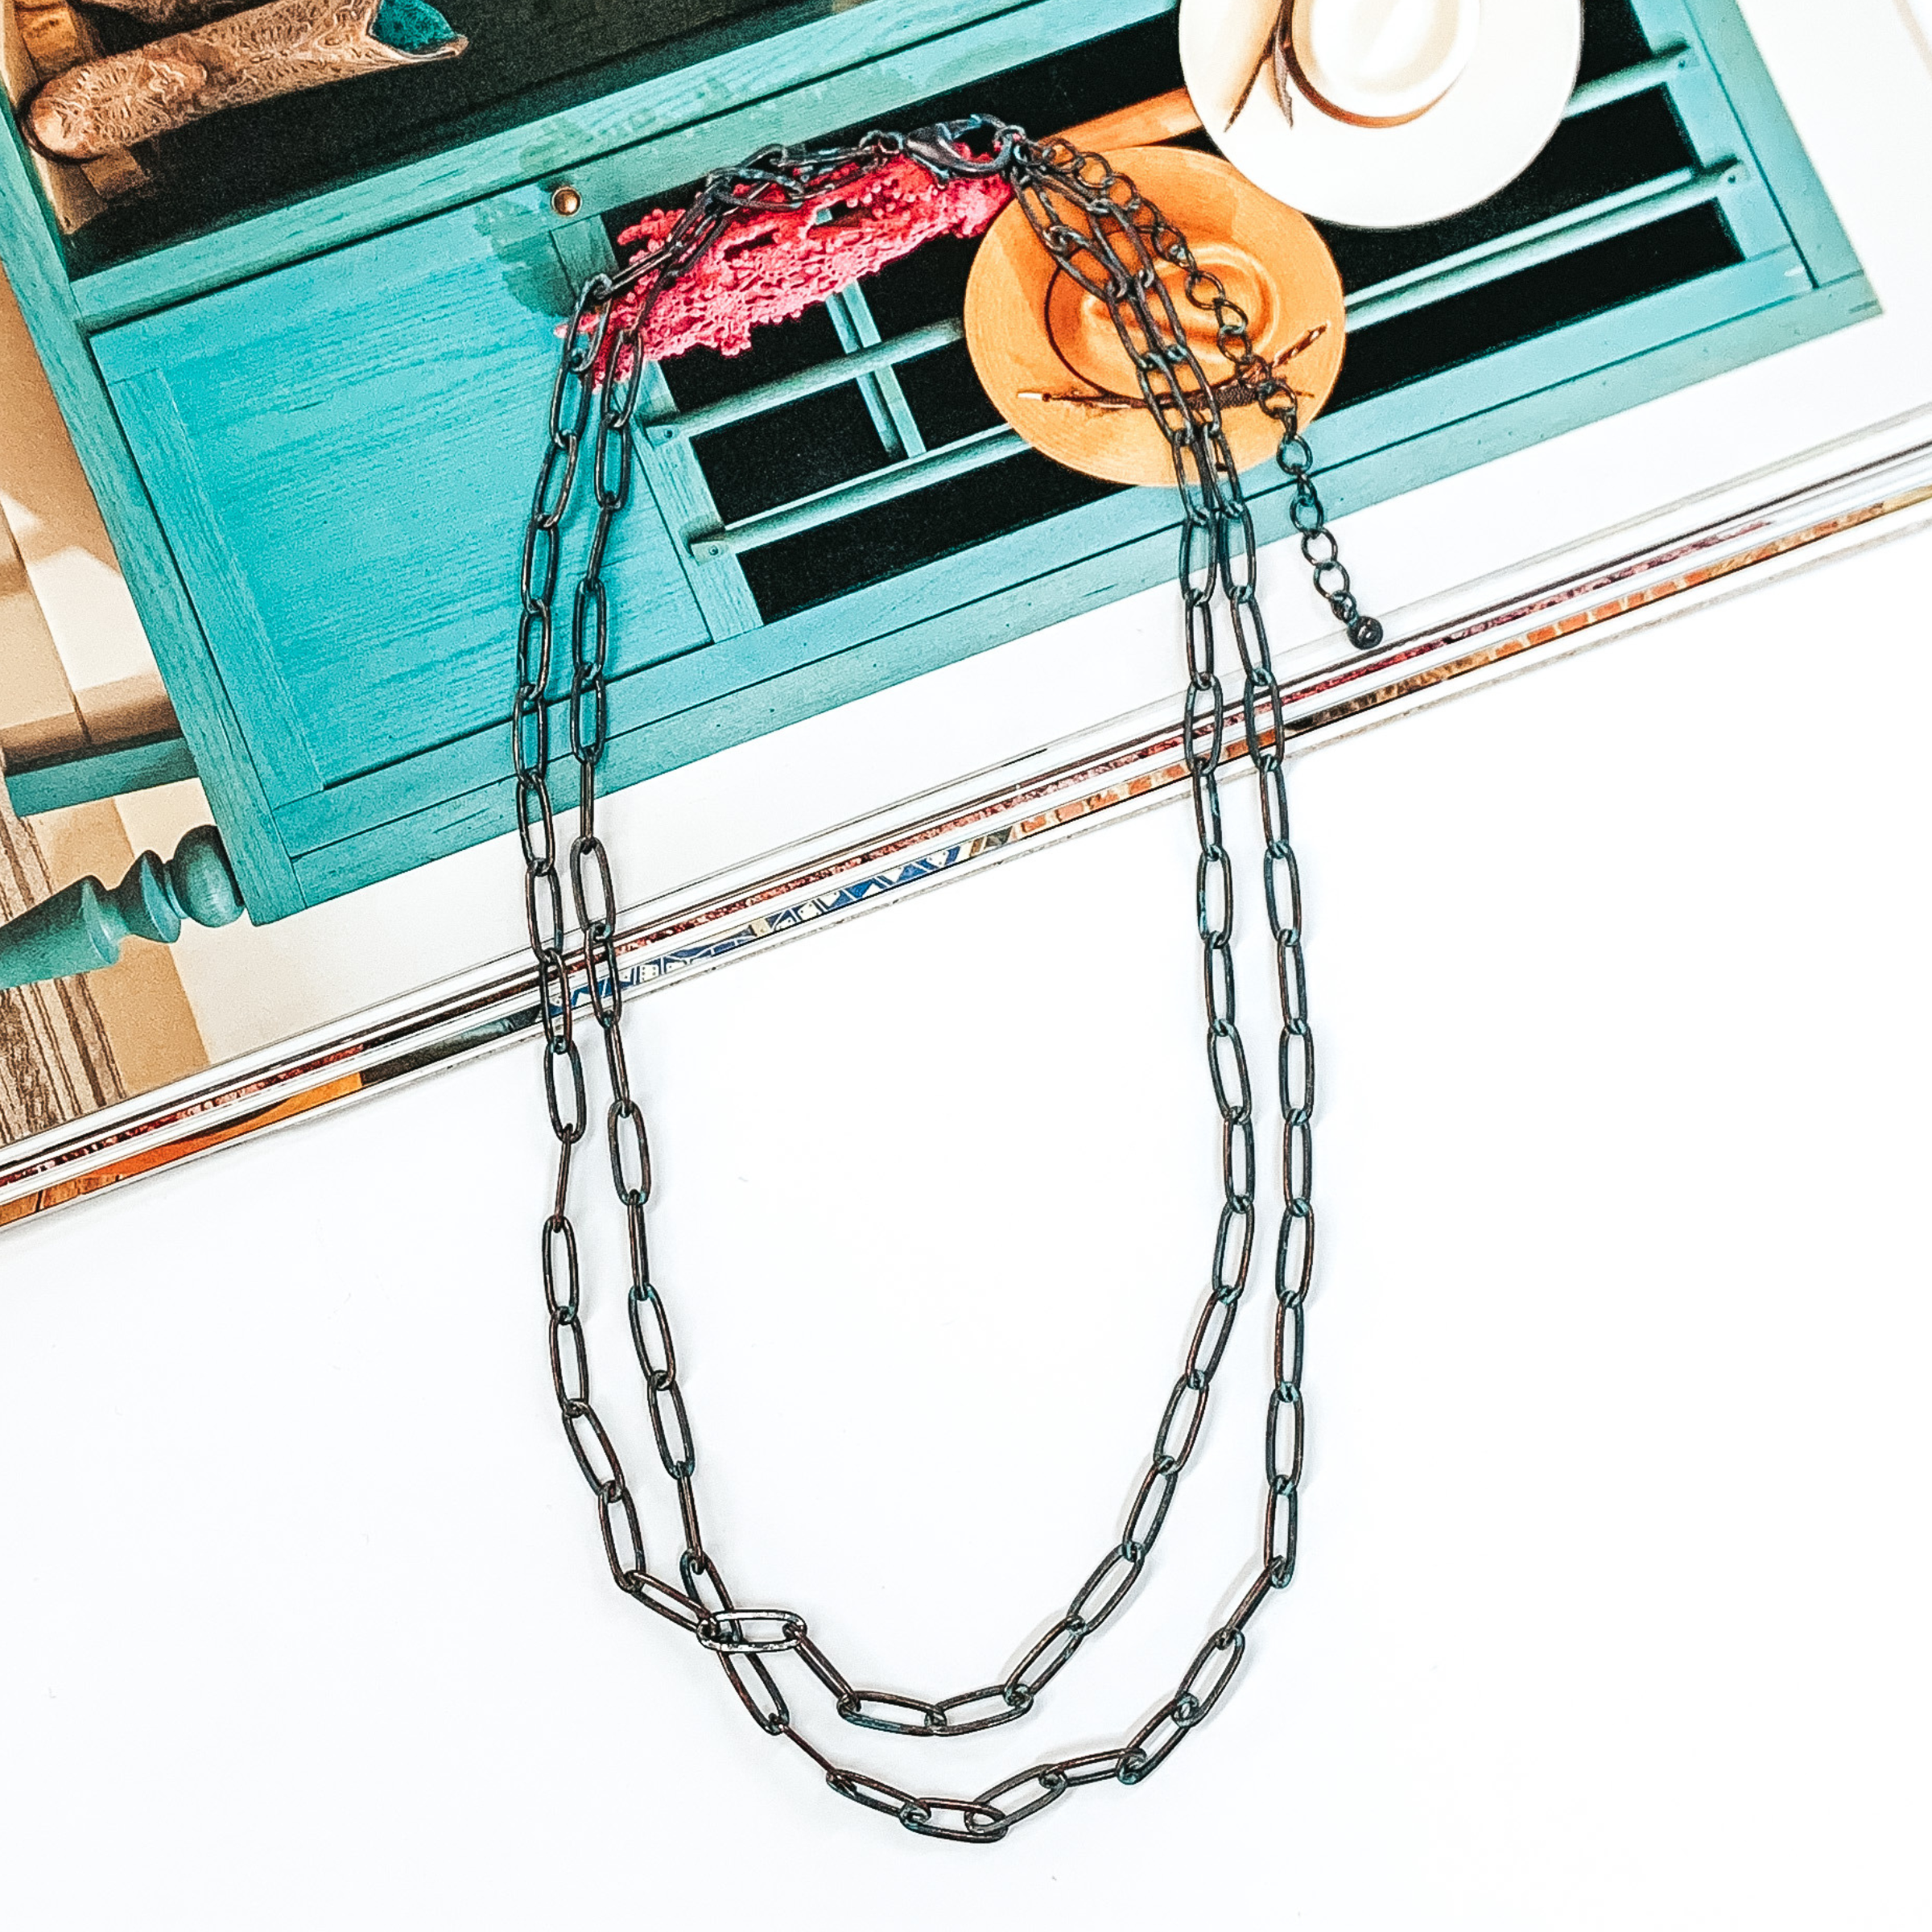 Patina layered paperclip chain necklace that is pictured half on a magazine and half on a white background.